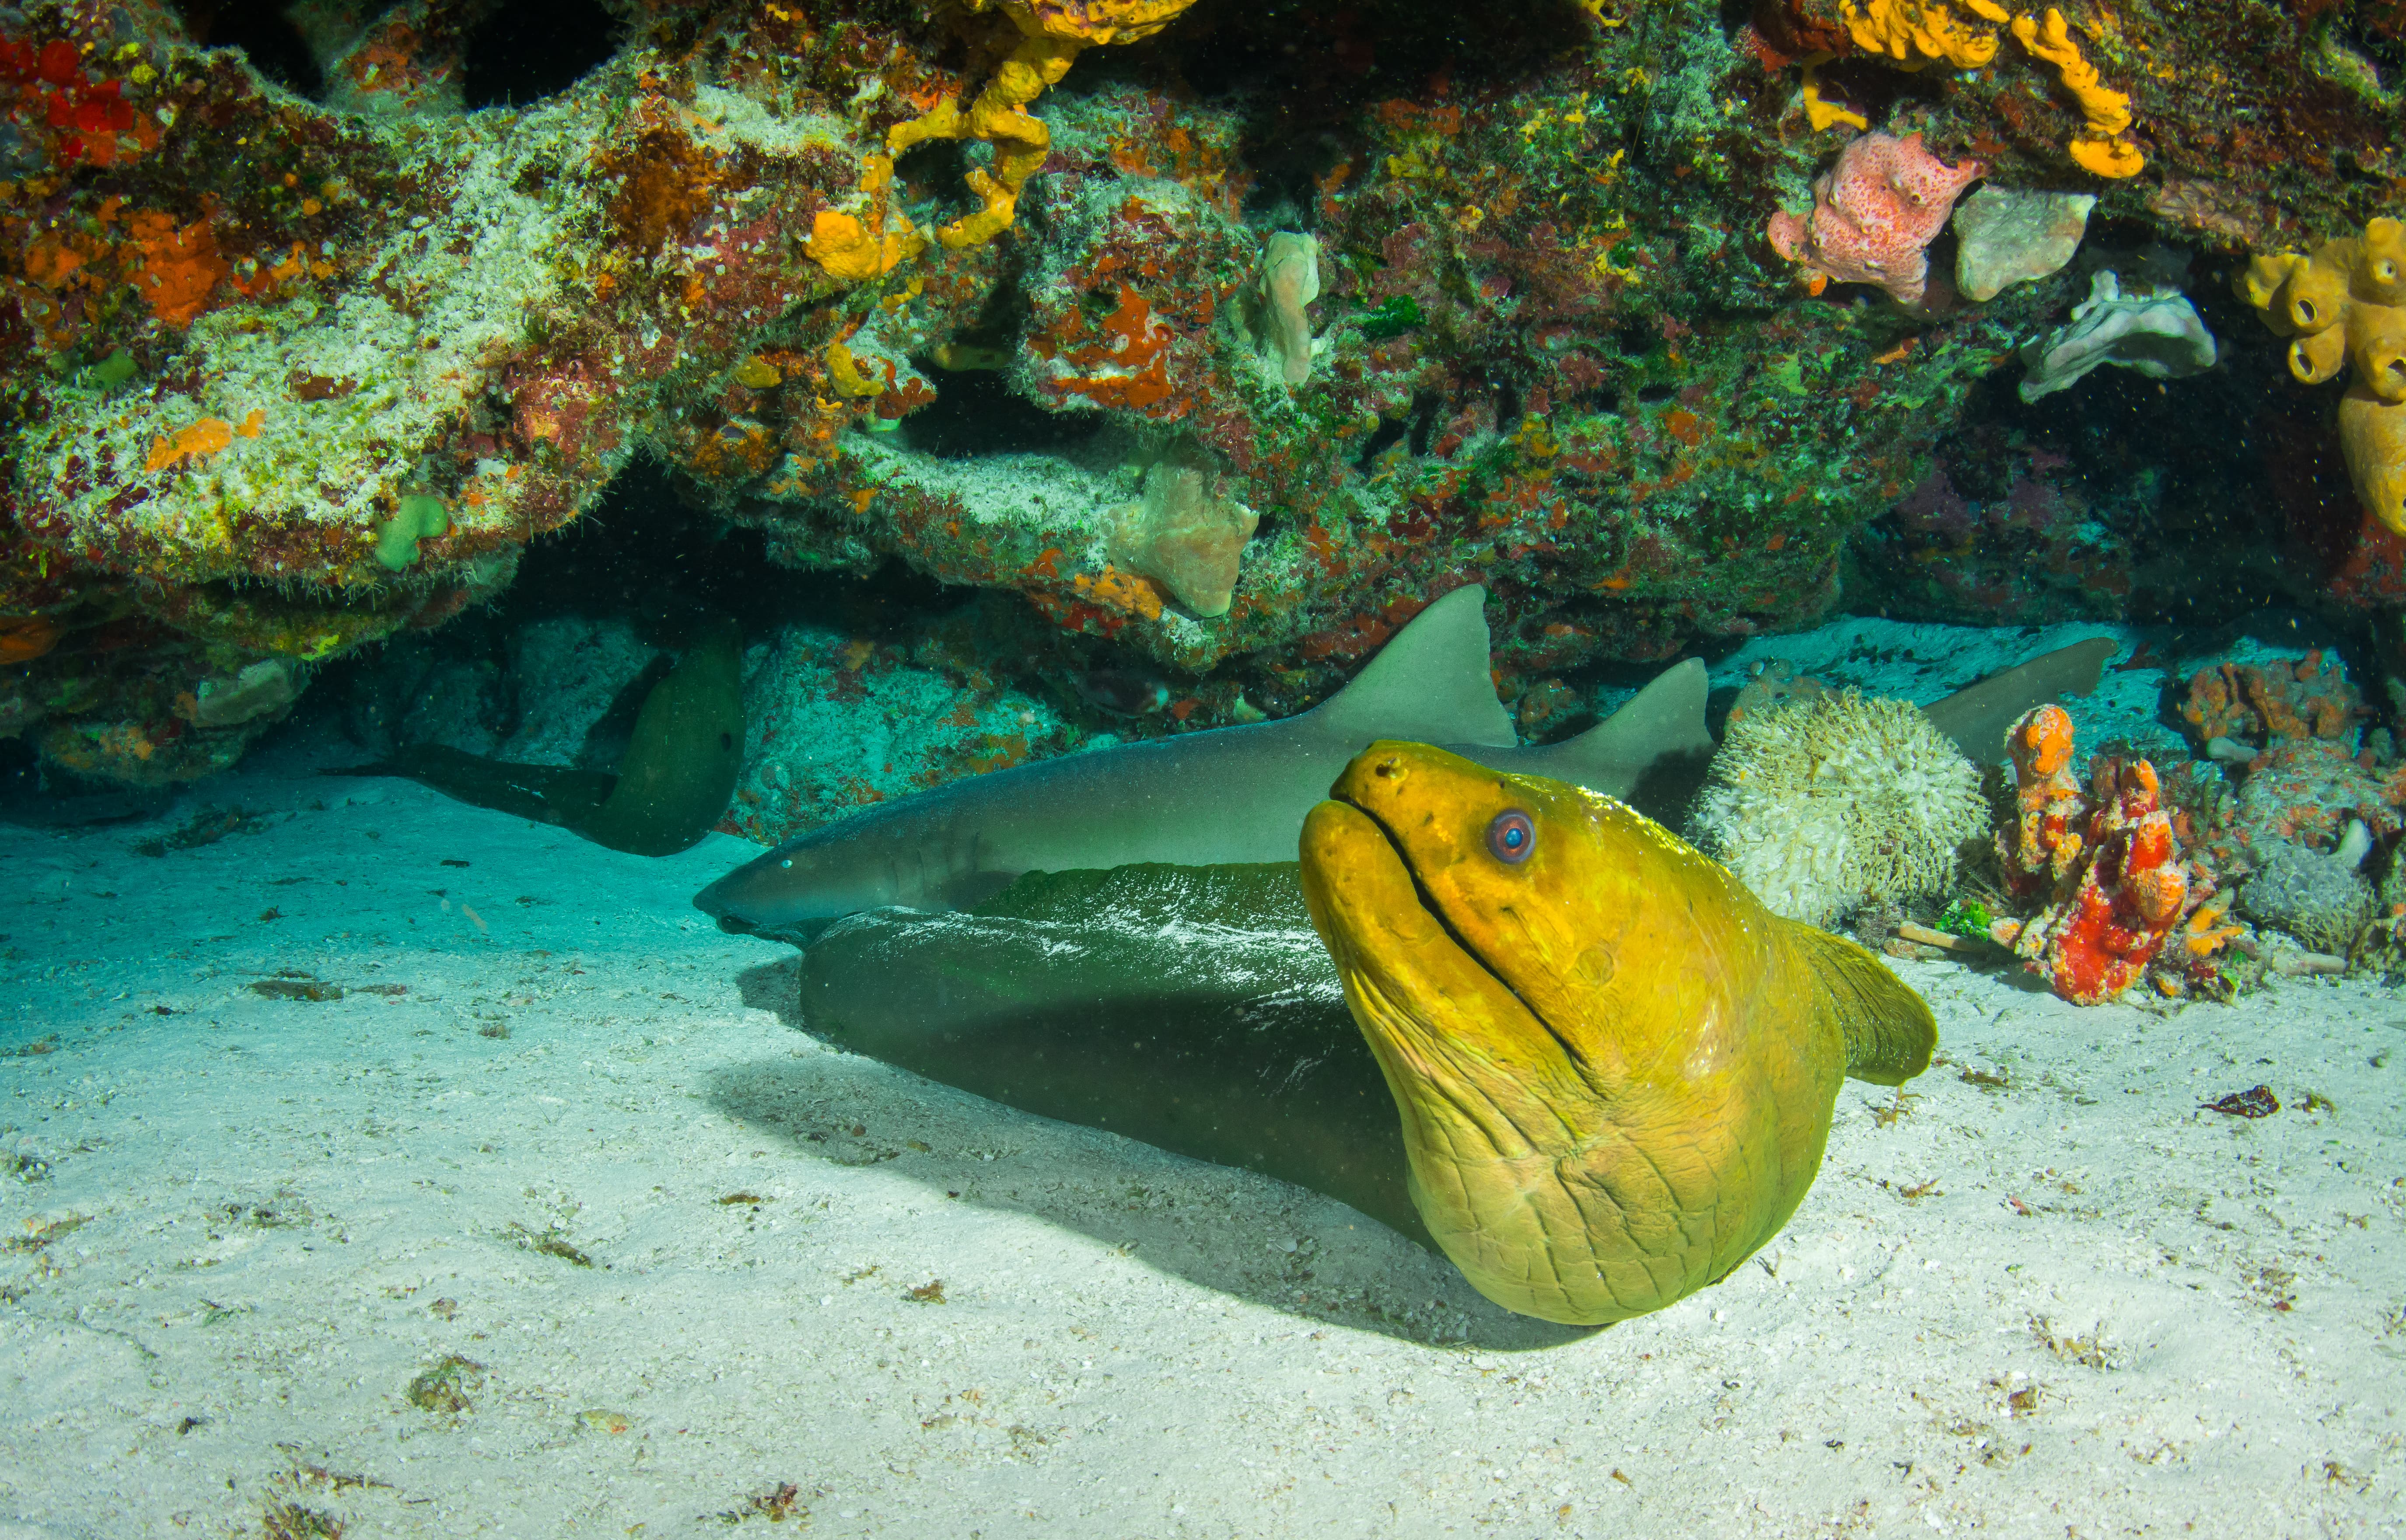 Green Moray Eel Cozumel Mexico (Photo provided by: Richard Russell)